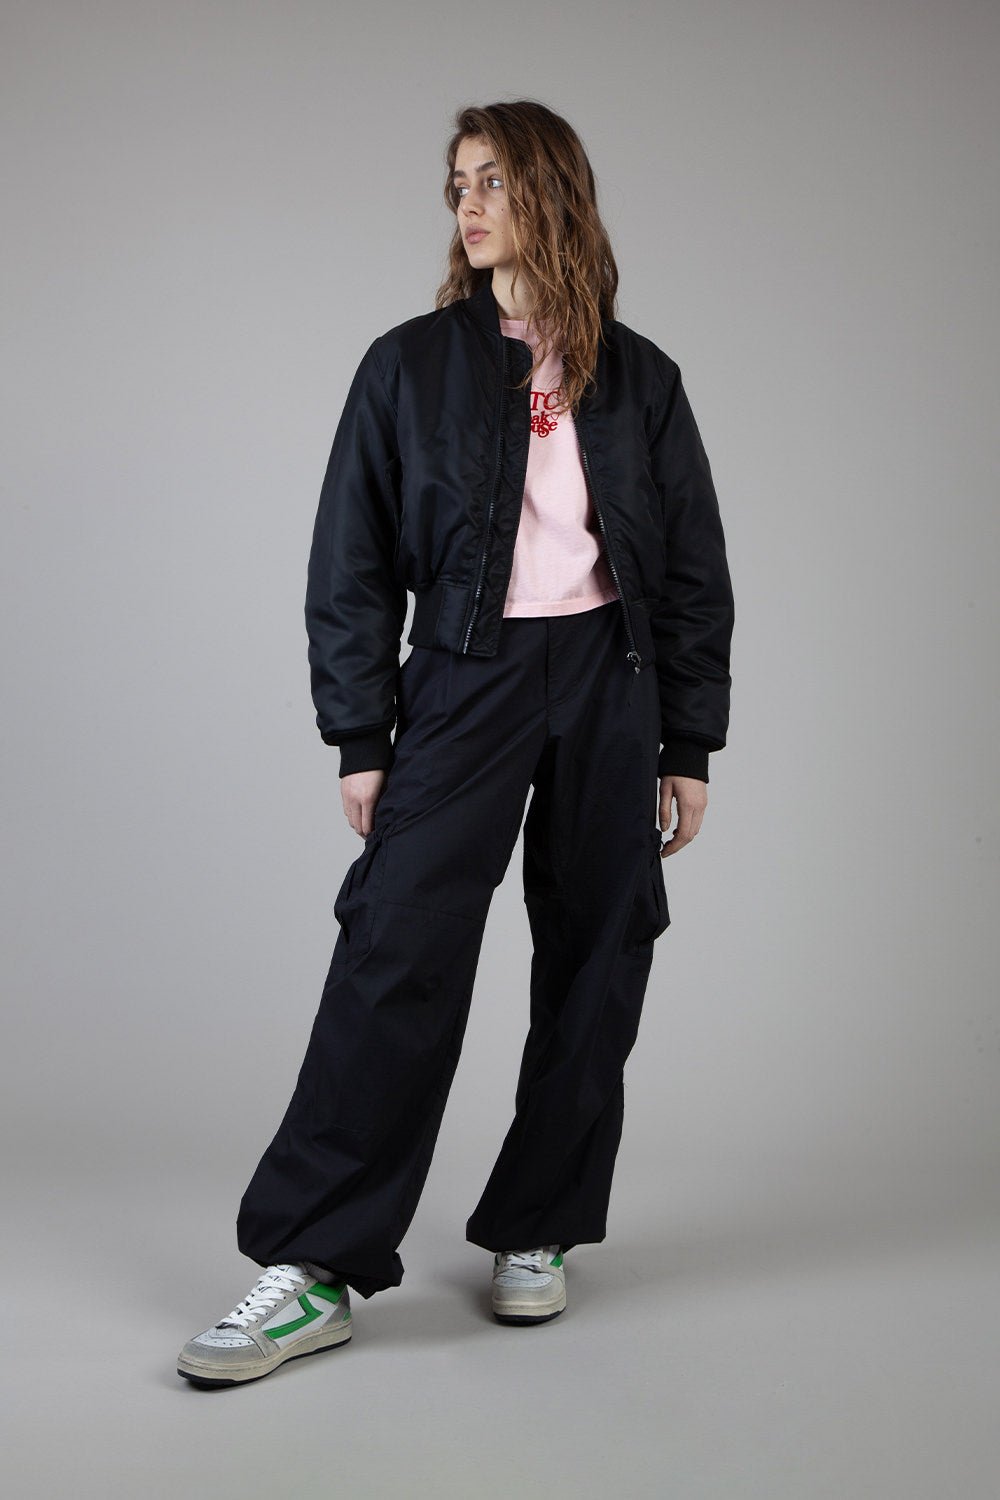 SUSPENDERS JACKET Crop bomber jacket, zip closure and front pockets. Composition 100% Nylon HTC LOS ANGELES